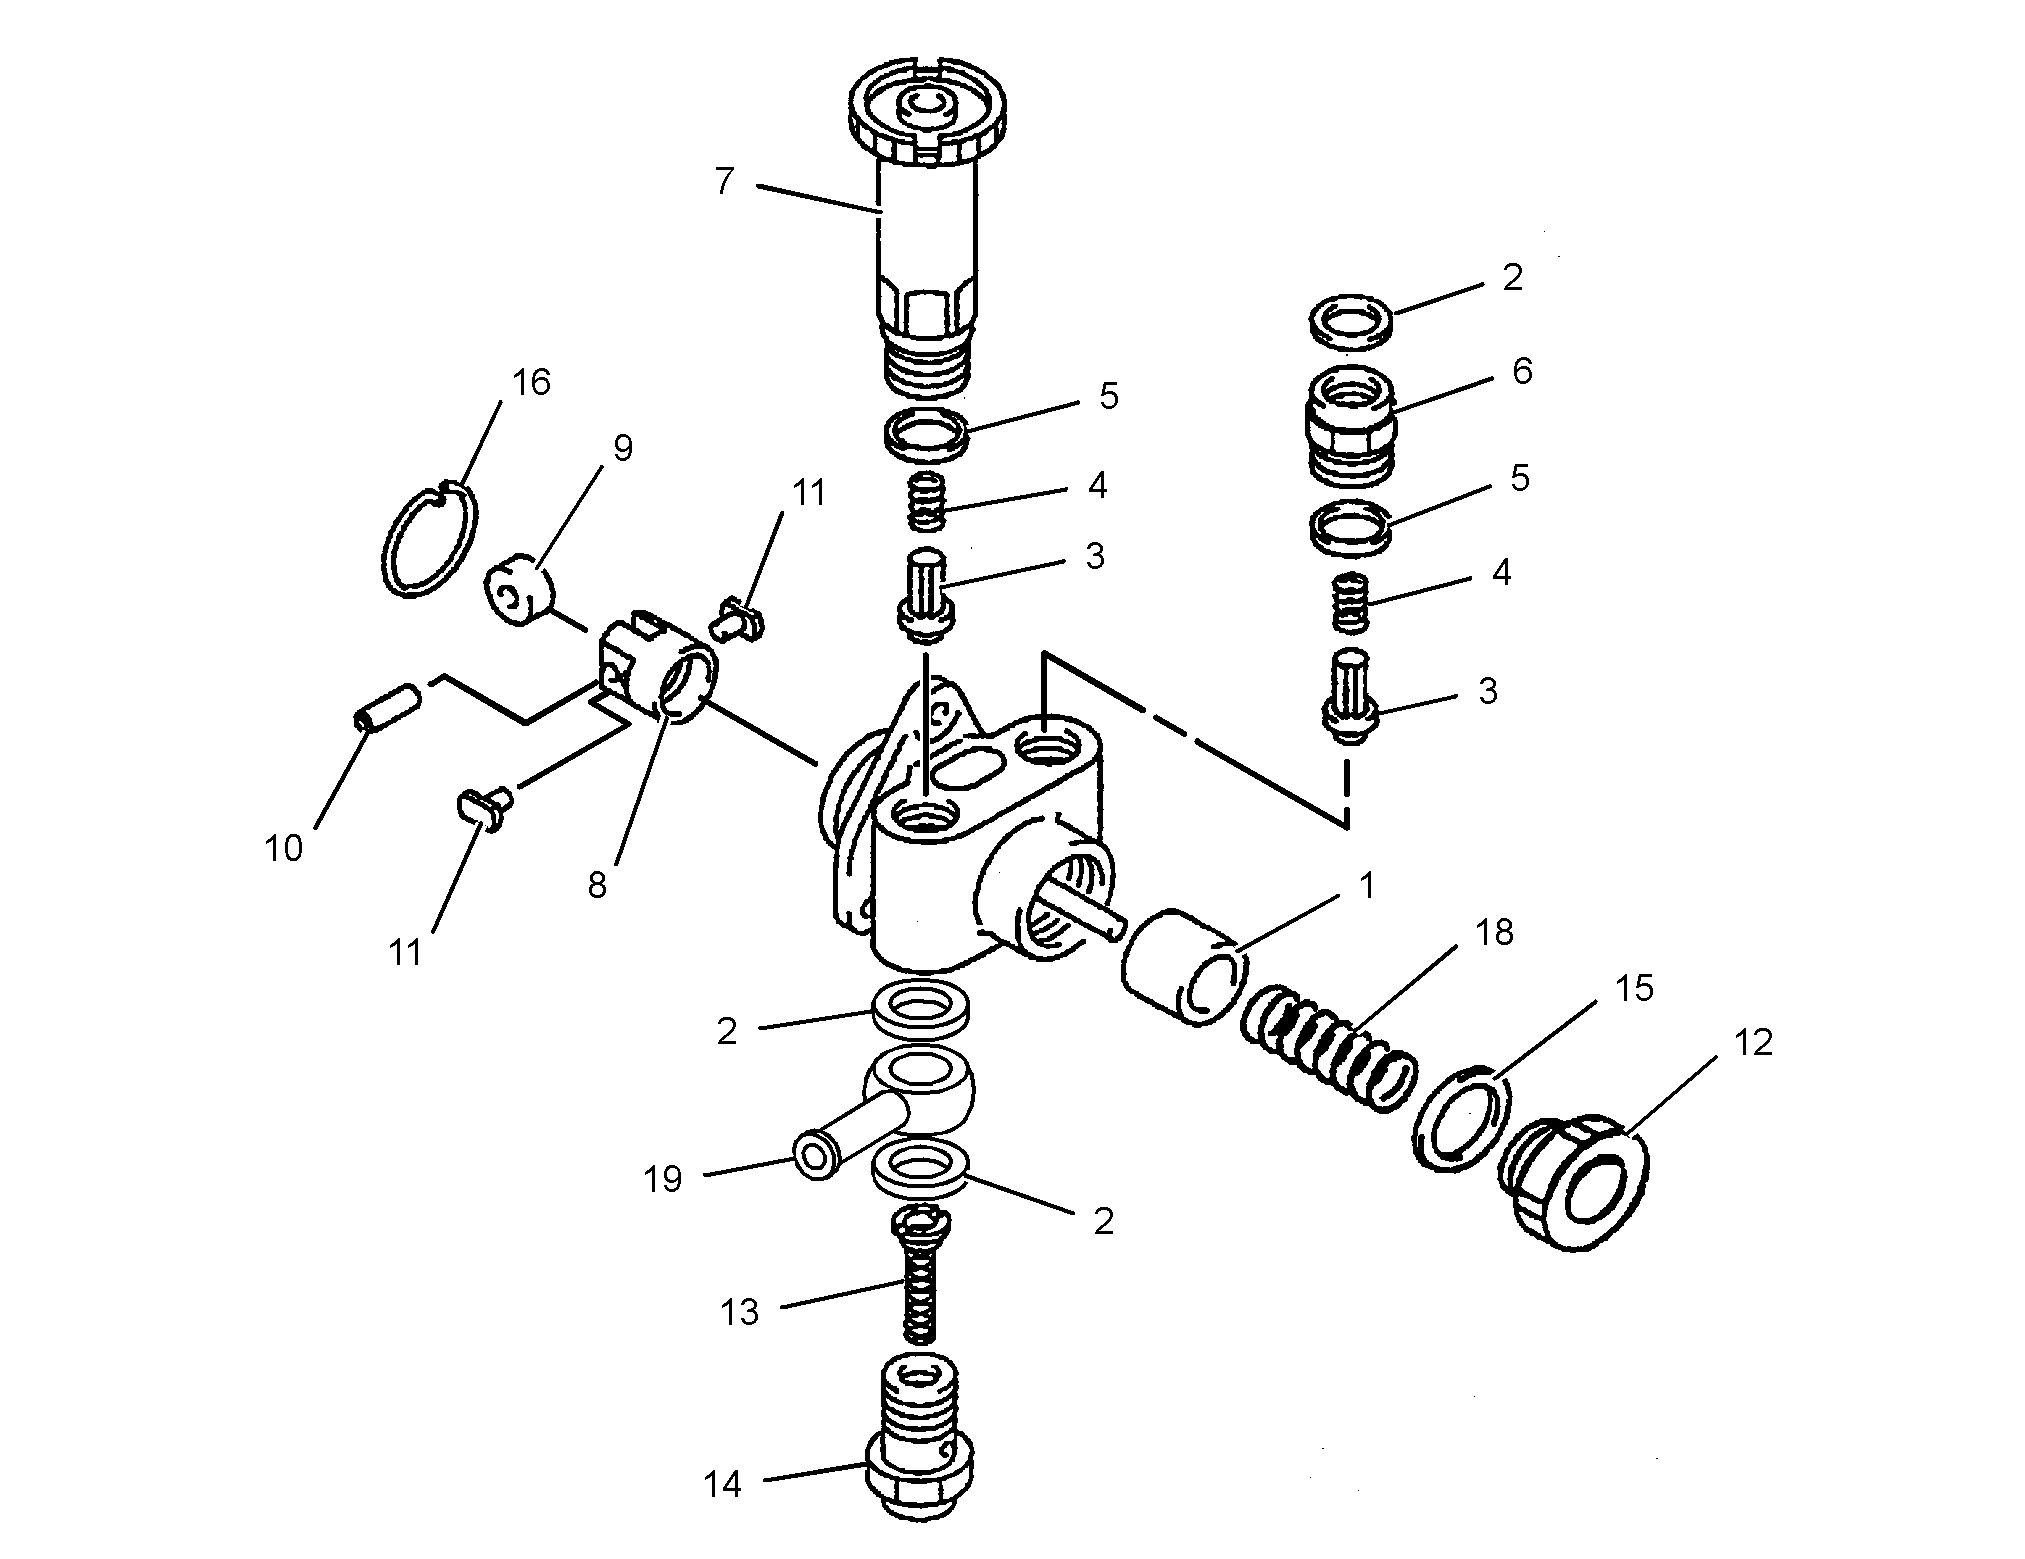 118-6814: Fuel Transfer and Priming Pump Assembly